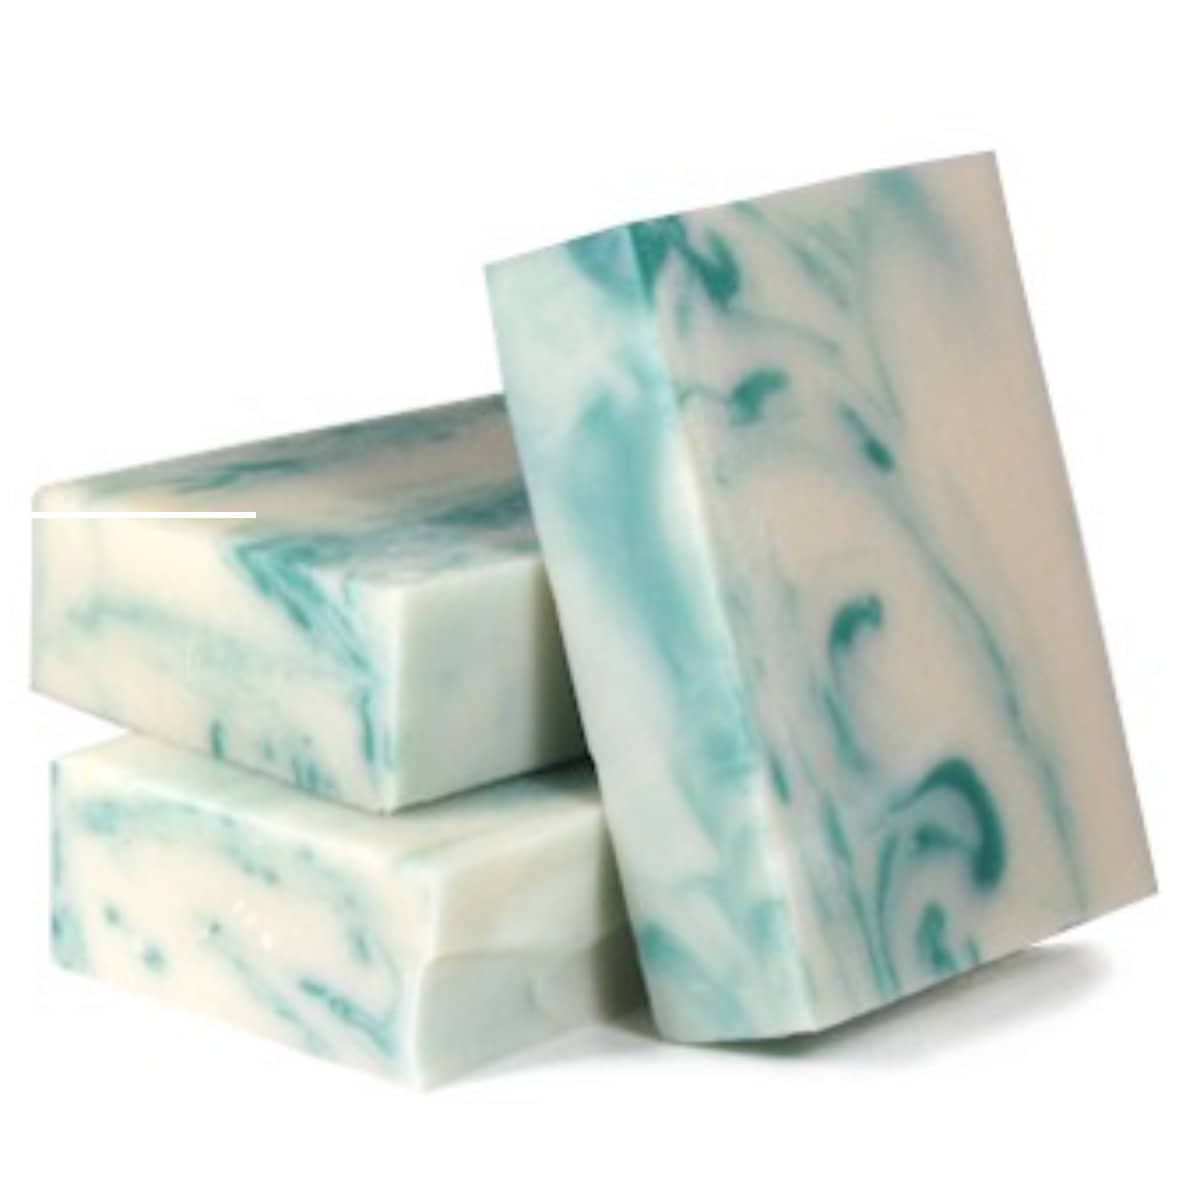 bars of aloe and yucca scented cold process soap.